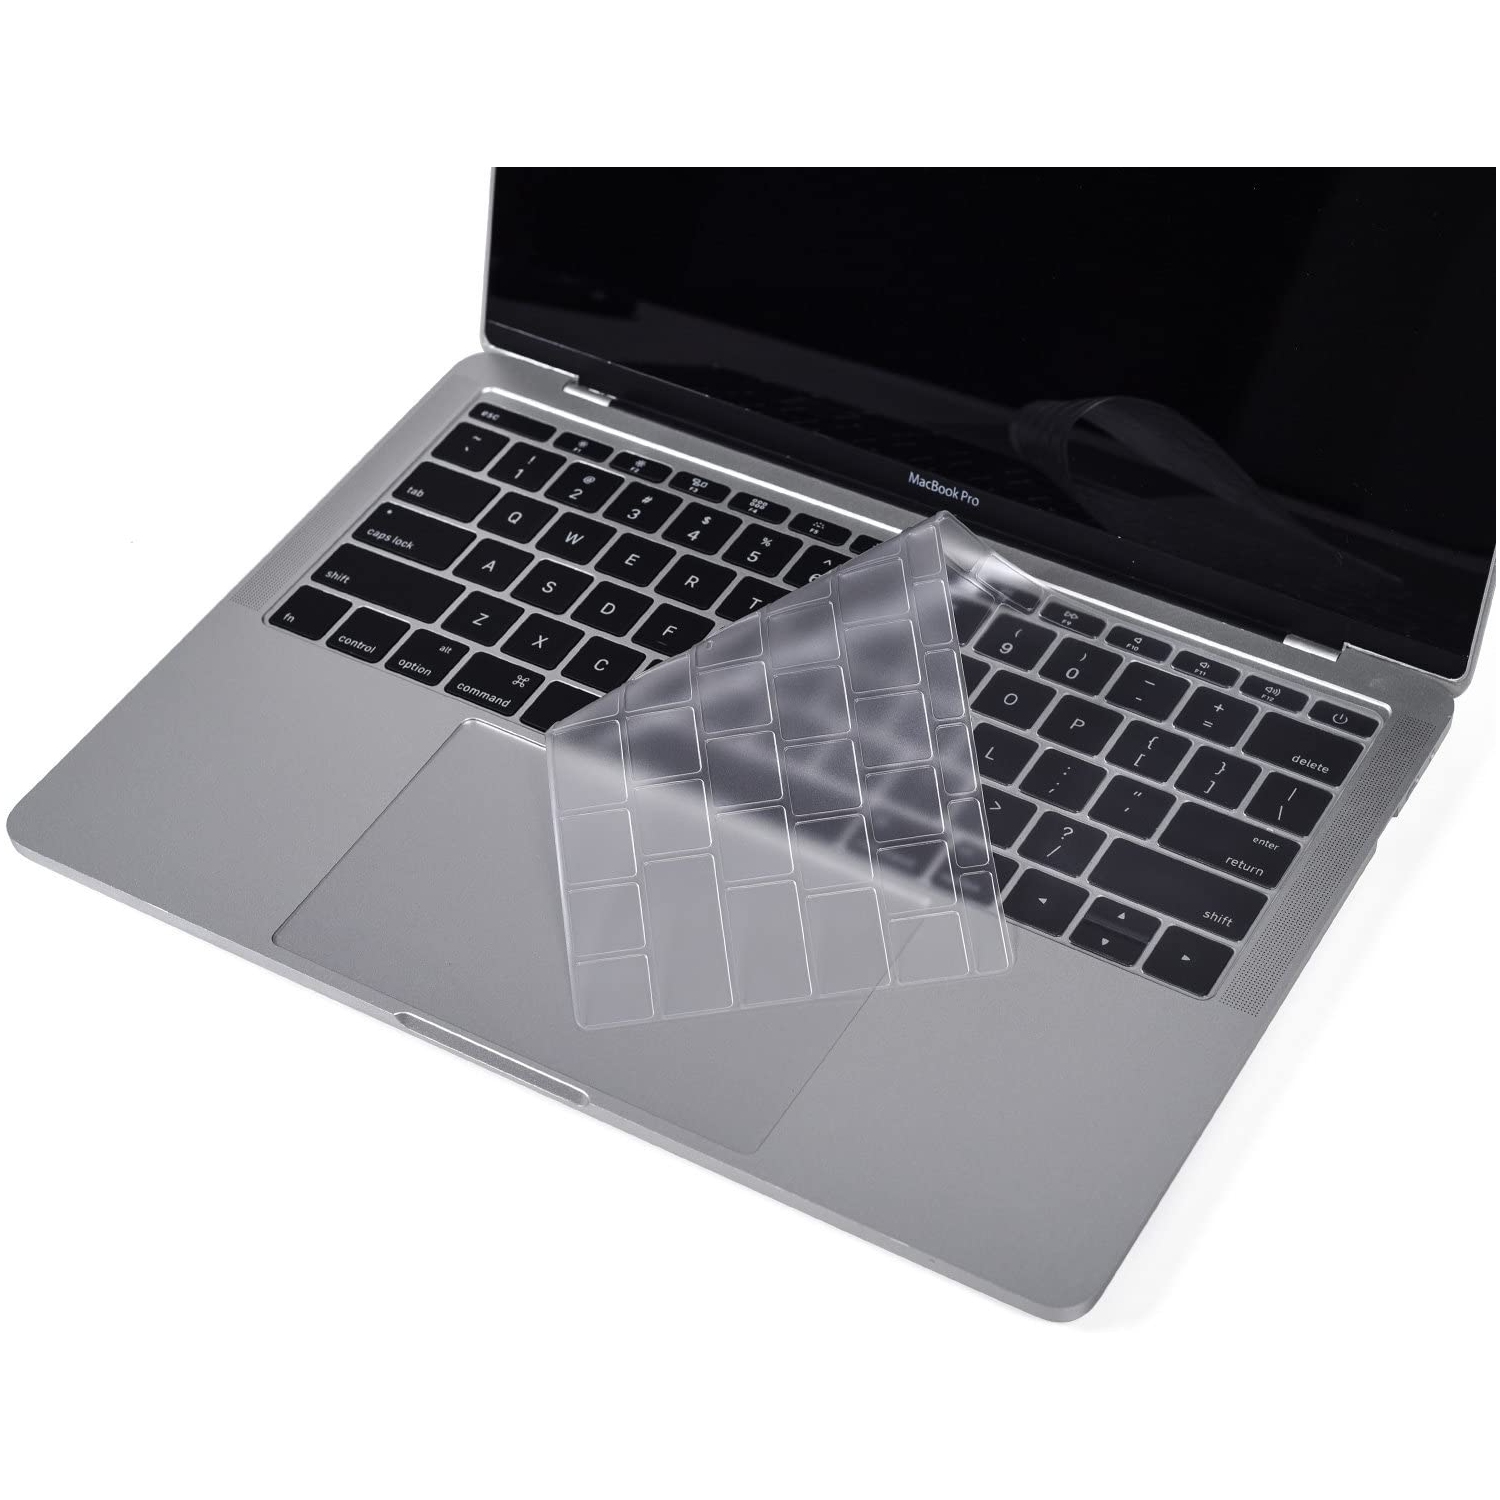 Premium Ultra Thin MacBook Keyboard Cover for Apple MacBook Pro 13 inch Model A1708 Without Touch Bar Only(with Function Keys, 2019-2016 Release), TPU